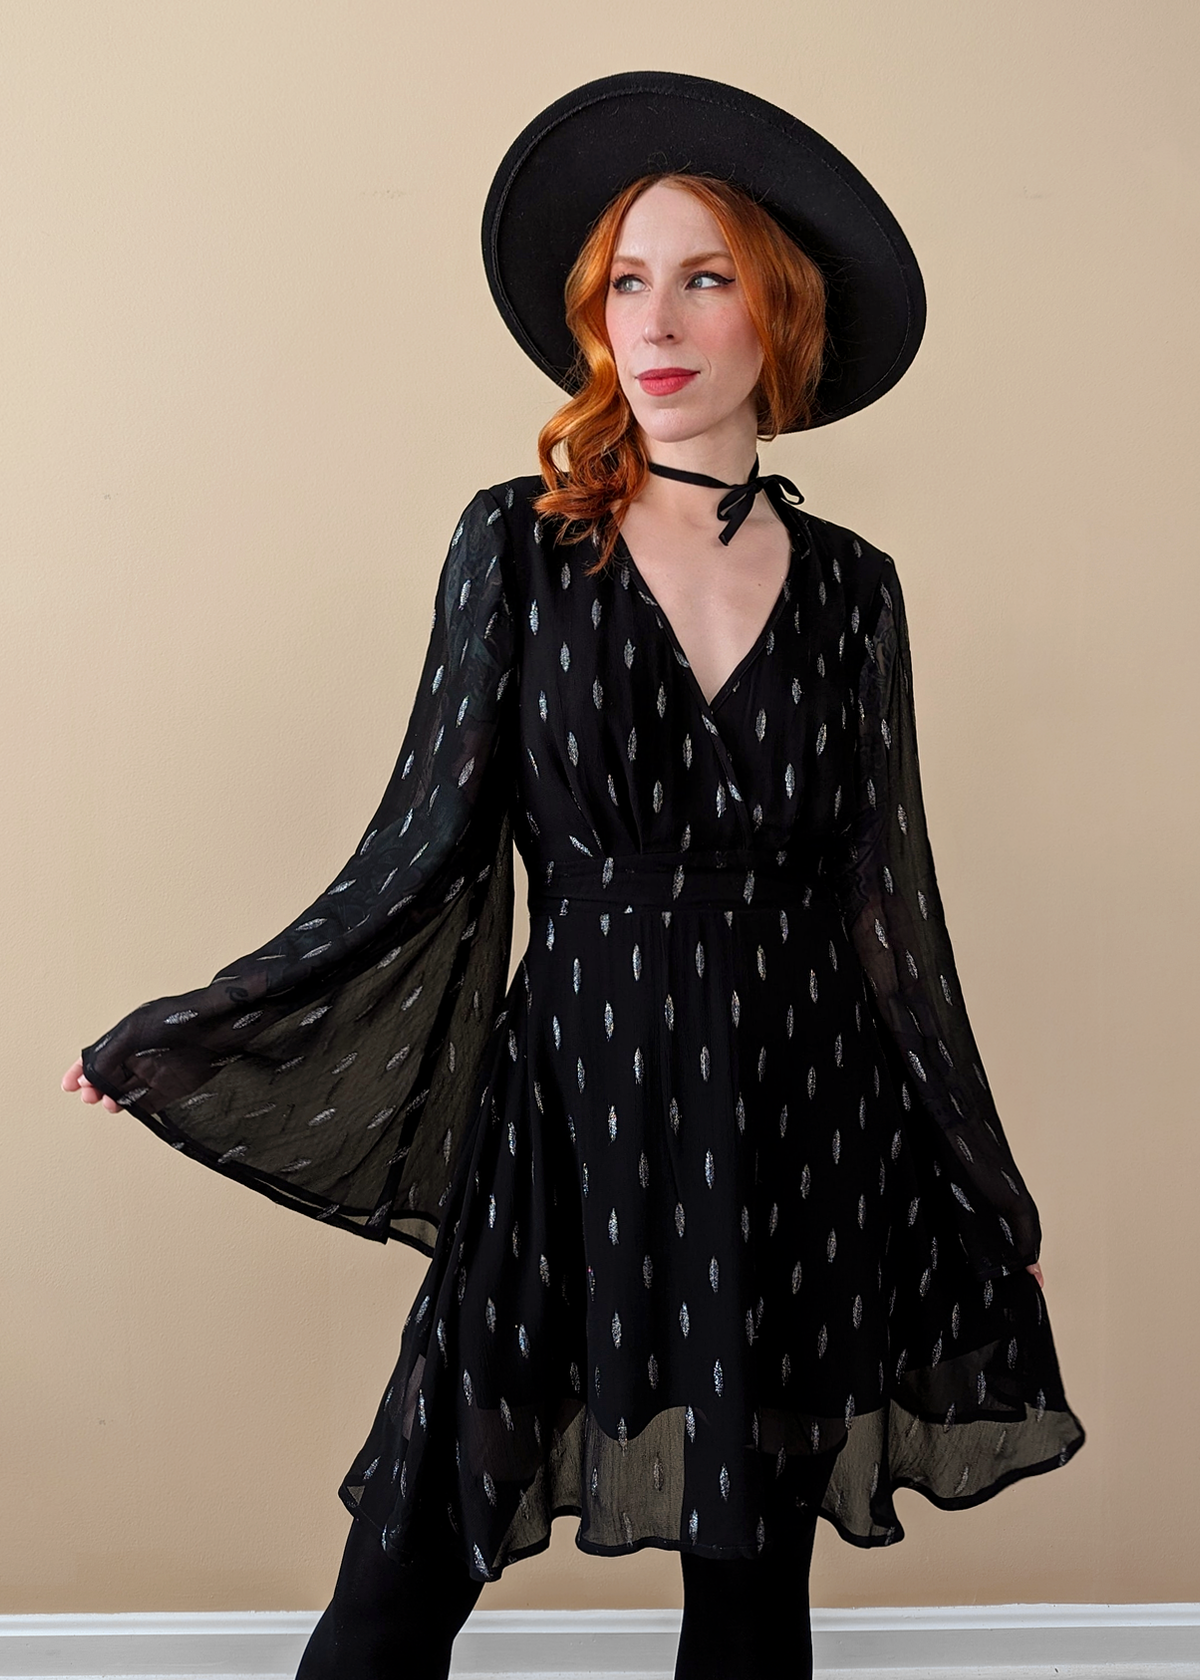 Stevie Nicks vibes. Witchy Angel Bell Sleeve Mini dress with v-neckline, and fluttery, floaty fit. Black chiffon with silver metallic threading details.